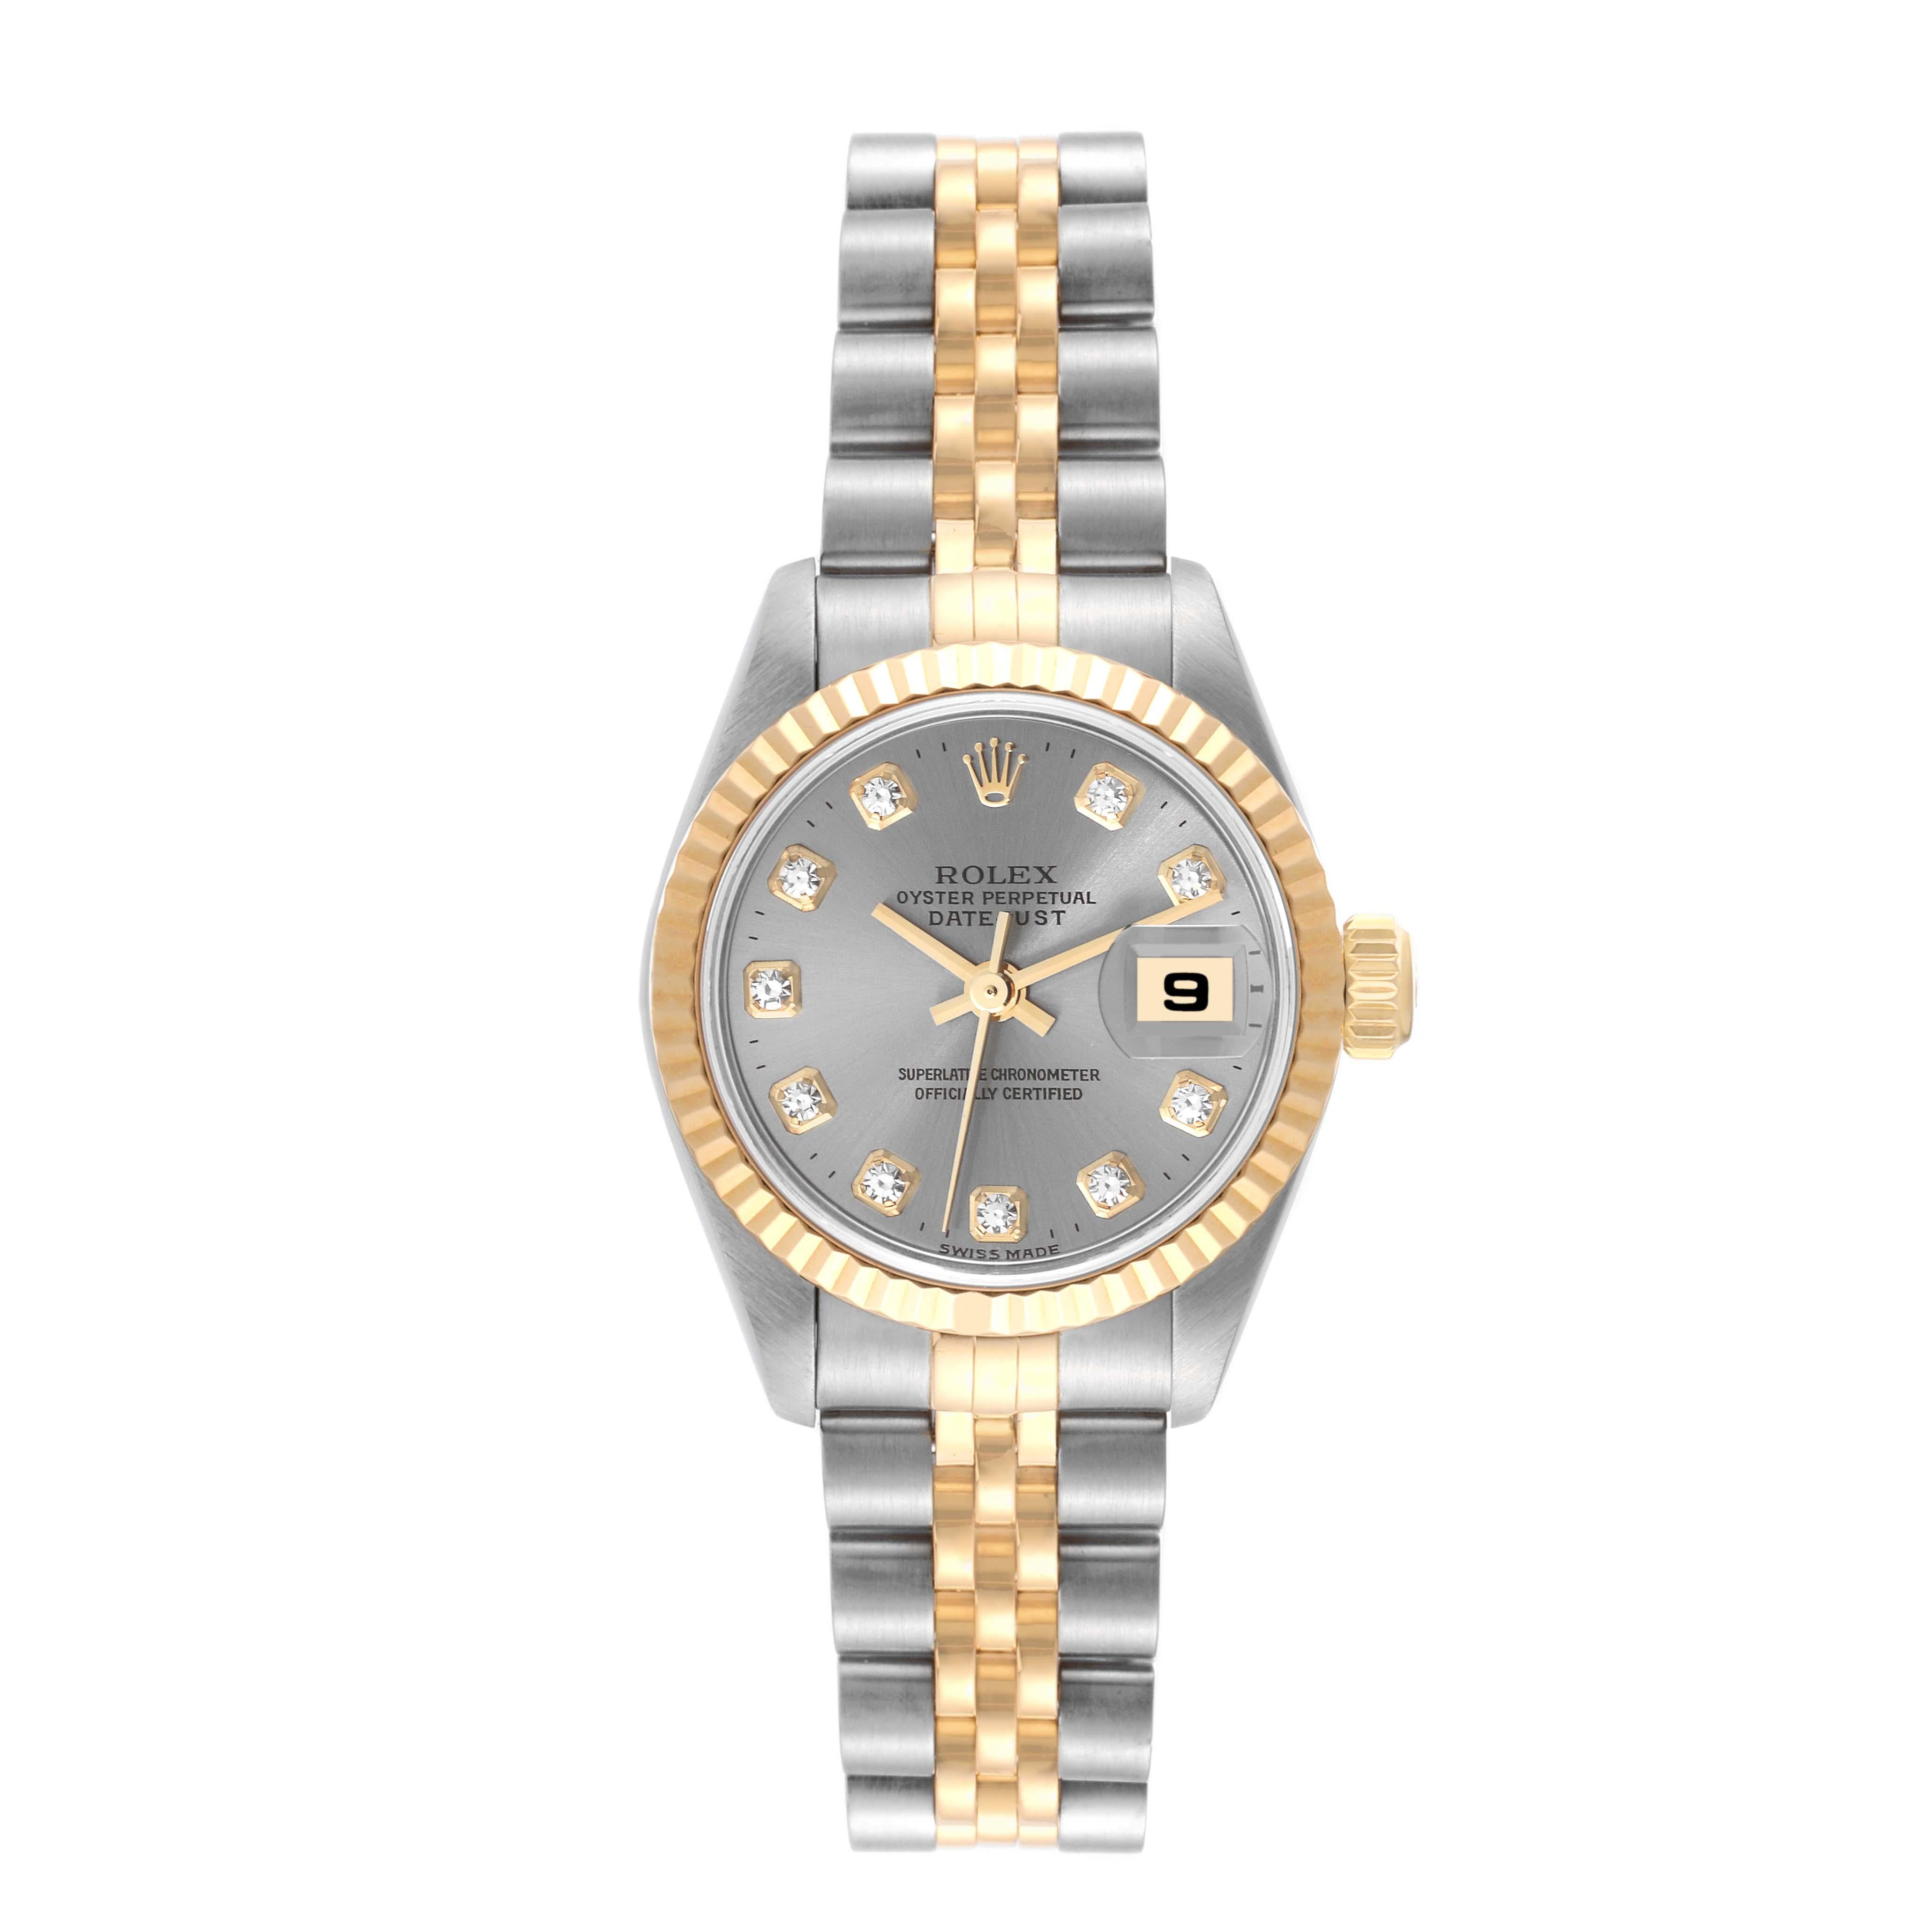 Rolex Datejust Steel Yellow Gold Slate Diamond Dial Ladies Watch 79173. Officially certified chronometer automatic self-winding movement with quickset date function. Stainless steel oyster case 26.0 mm in diameter. Rolex logo on an 18K yellow gold